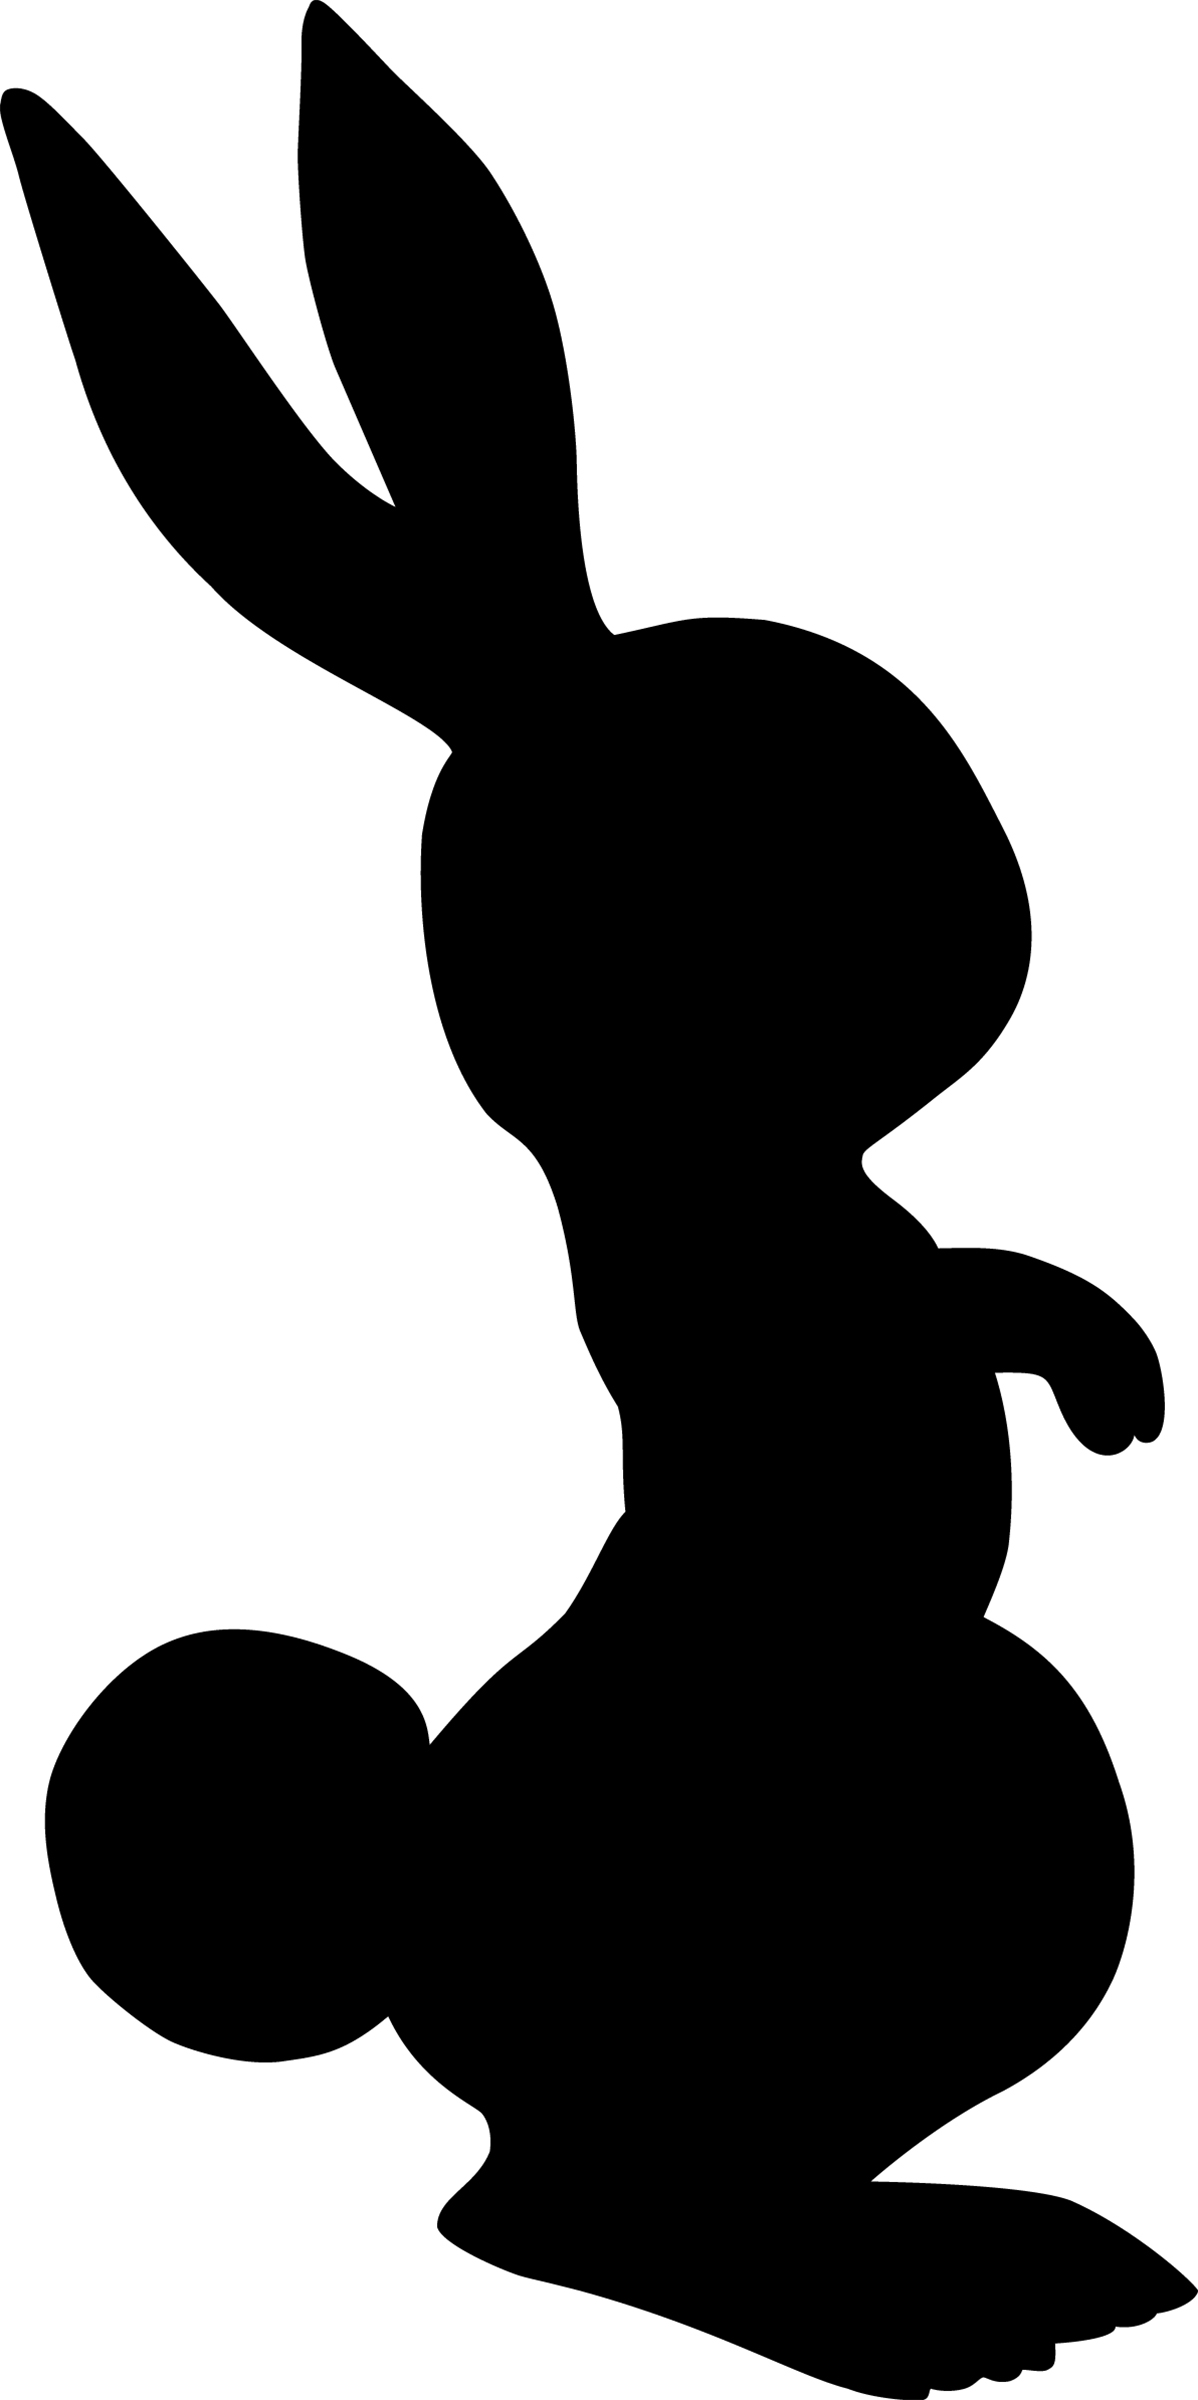 21 Cute Bunny Rabbit Silhouettes and Clipart! The Graphics Fairy